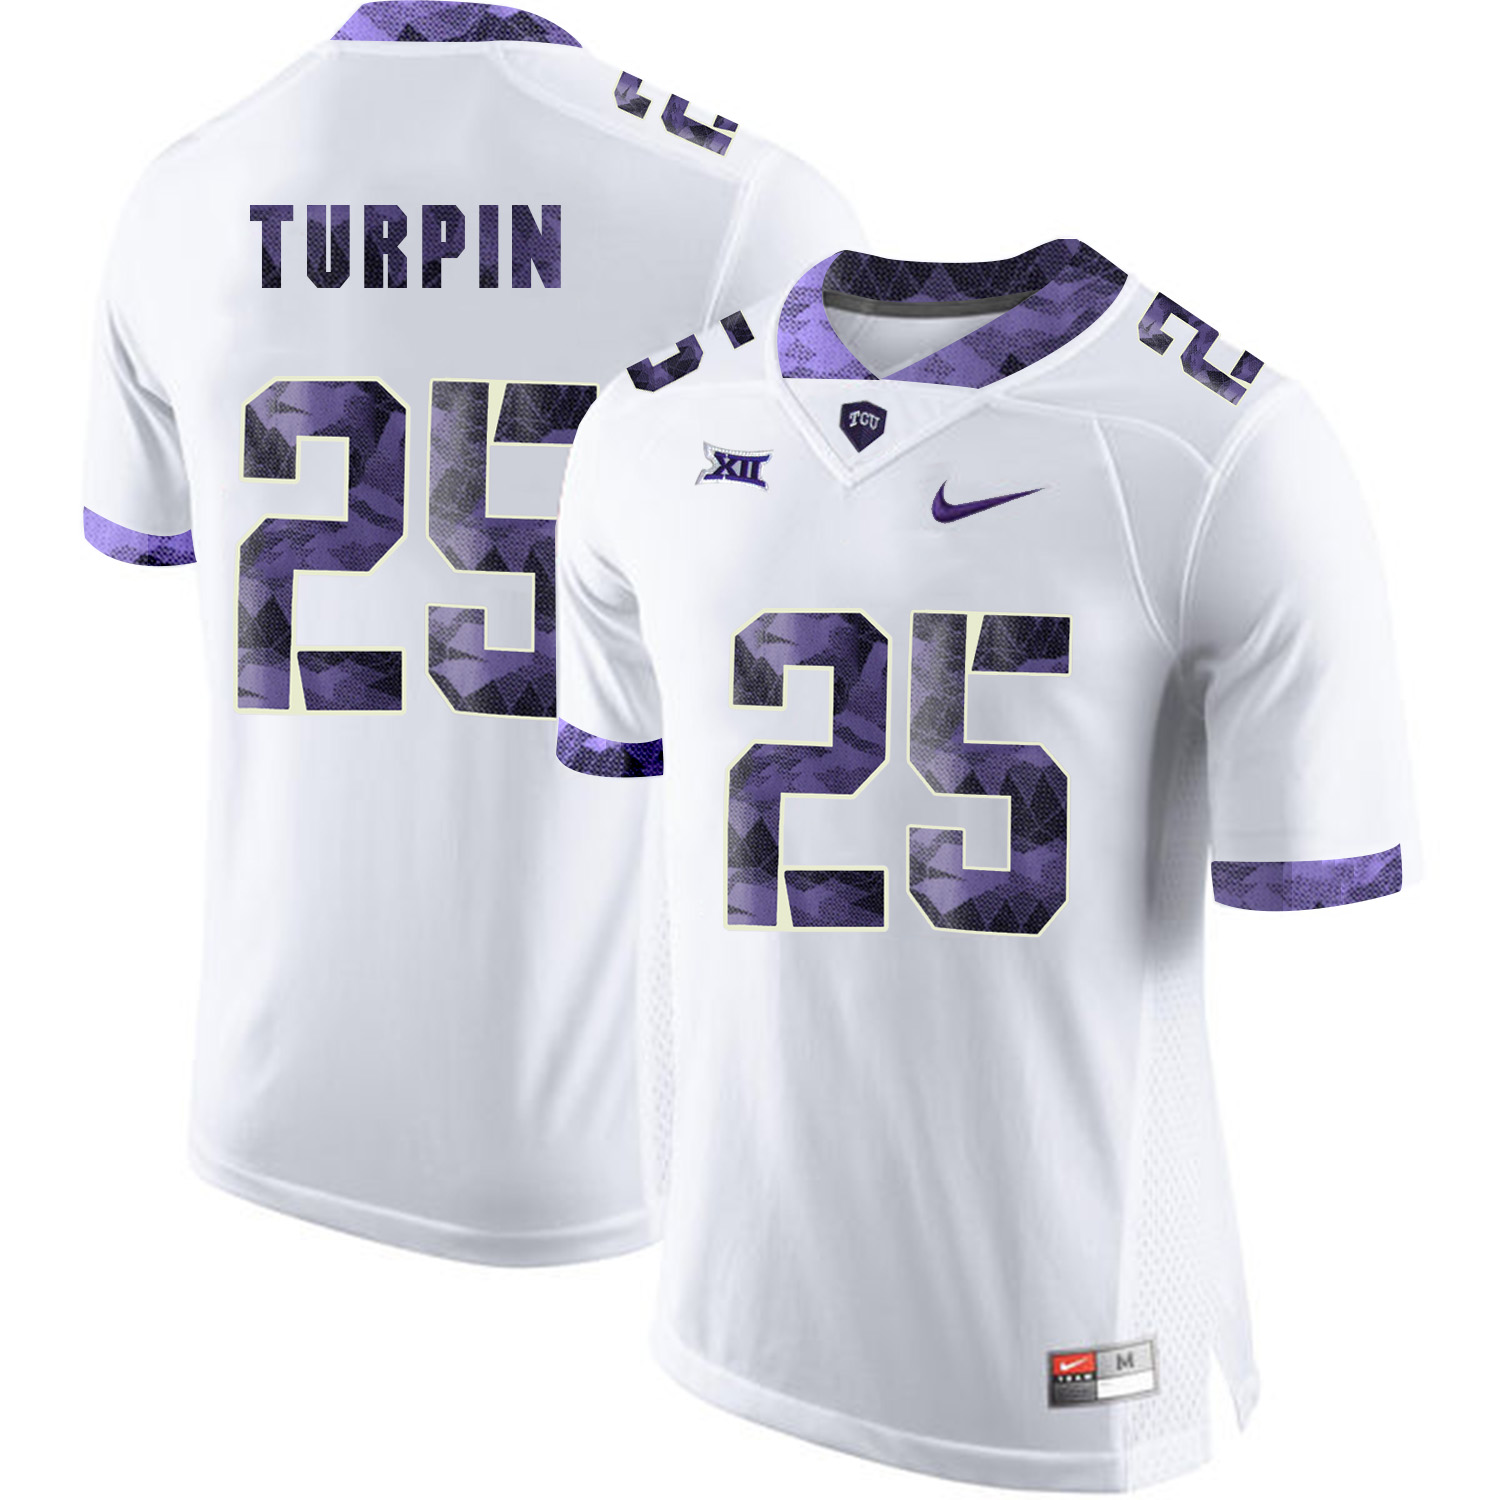 TCU Horned Frogs 25 KaVontae Turpin White College Football Jersey